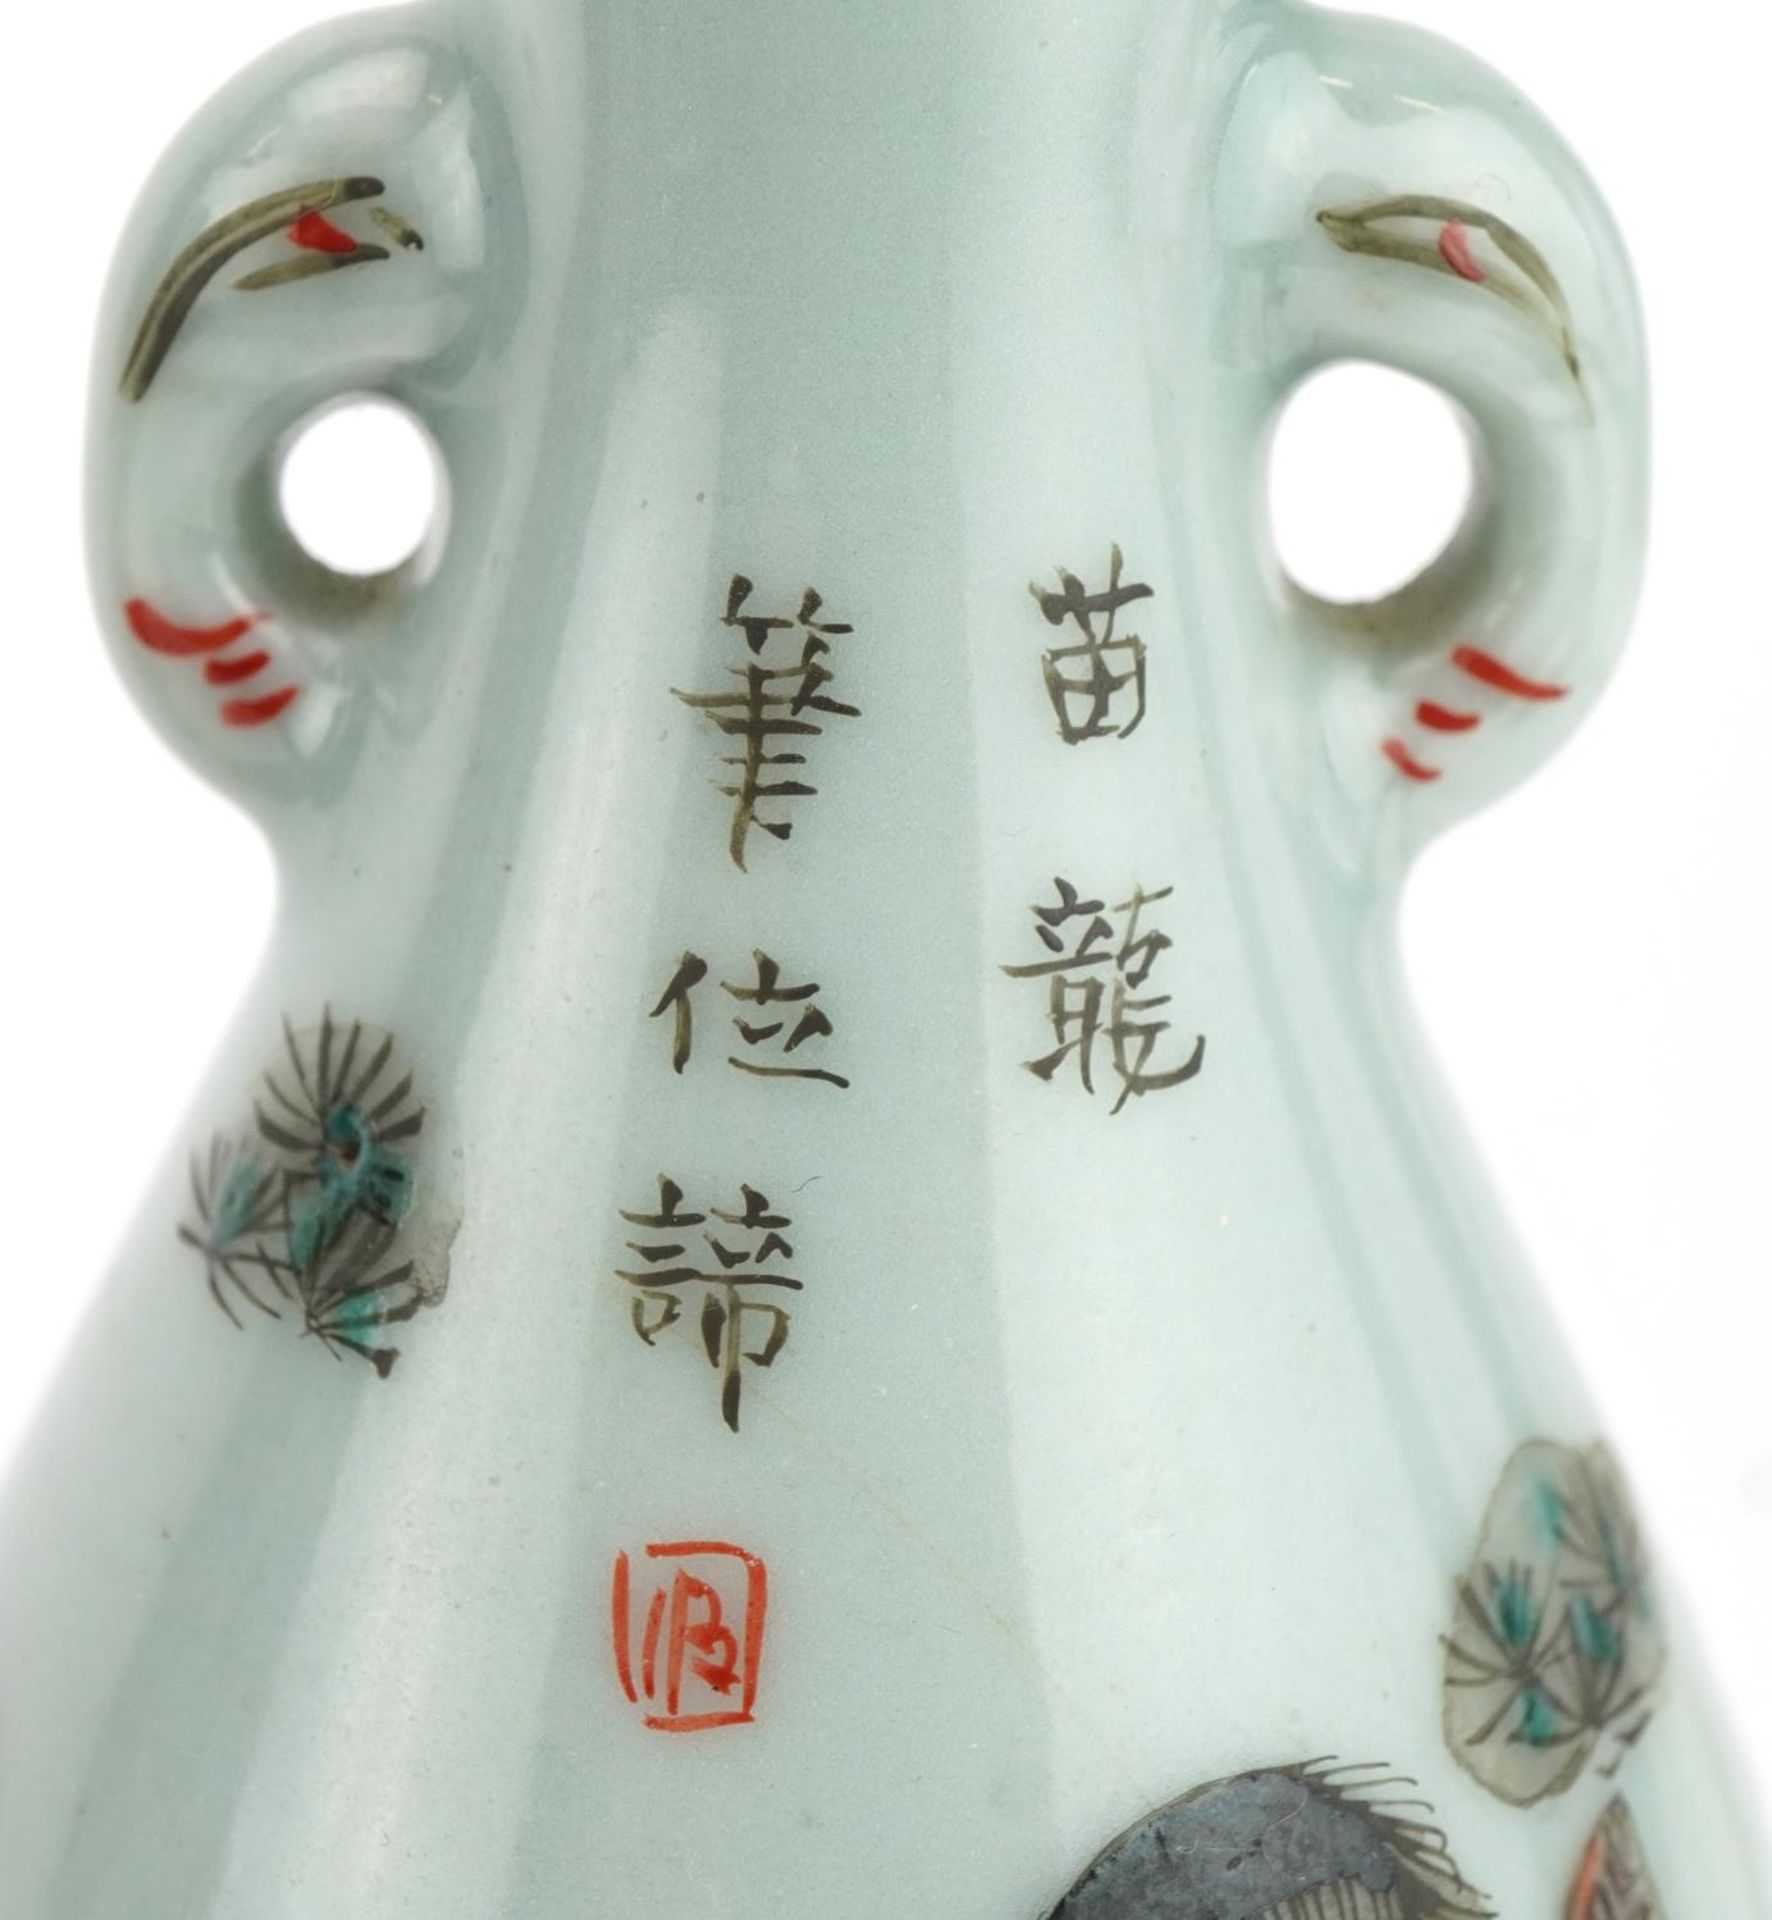 Pair of Japanese porcelain vases hand painted with a father and children, signed with calligraphy - Image 5 of 7